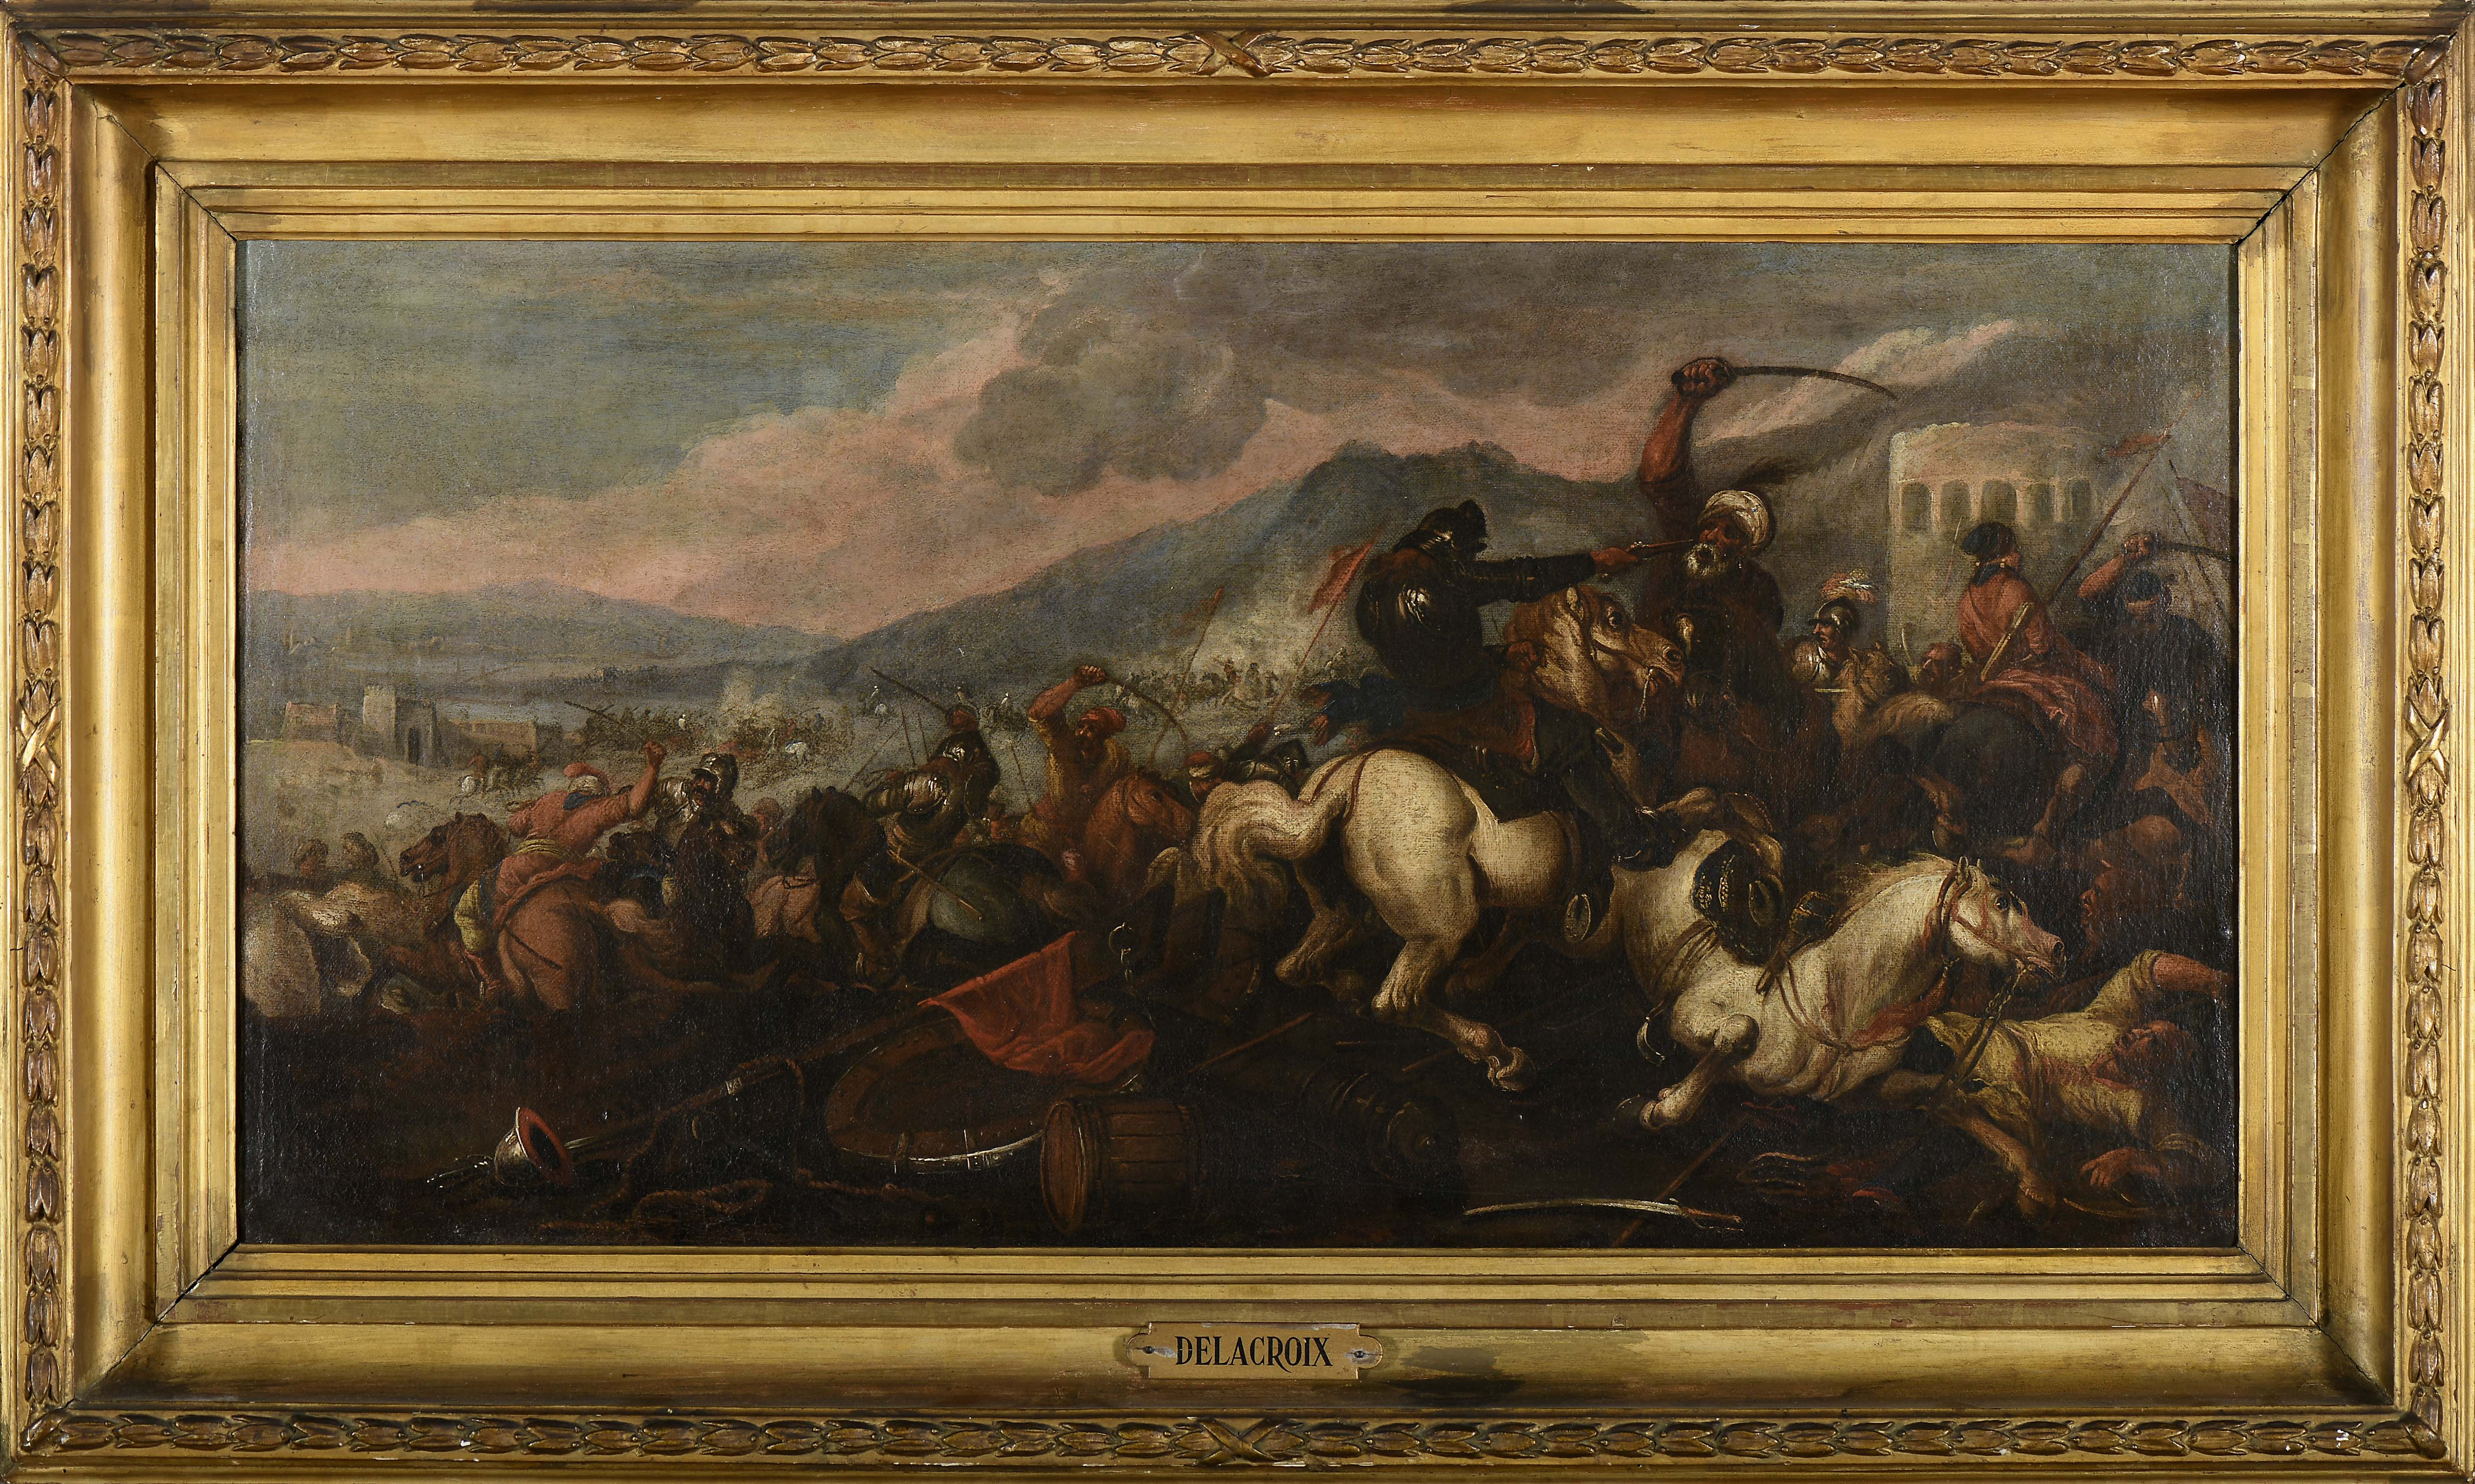 Cavalry battle between Arabs and Christians